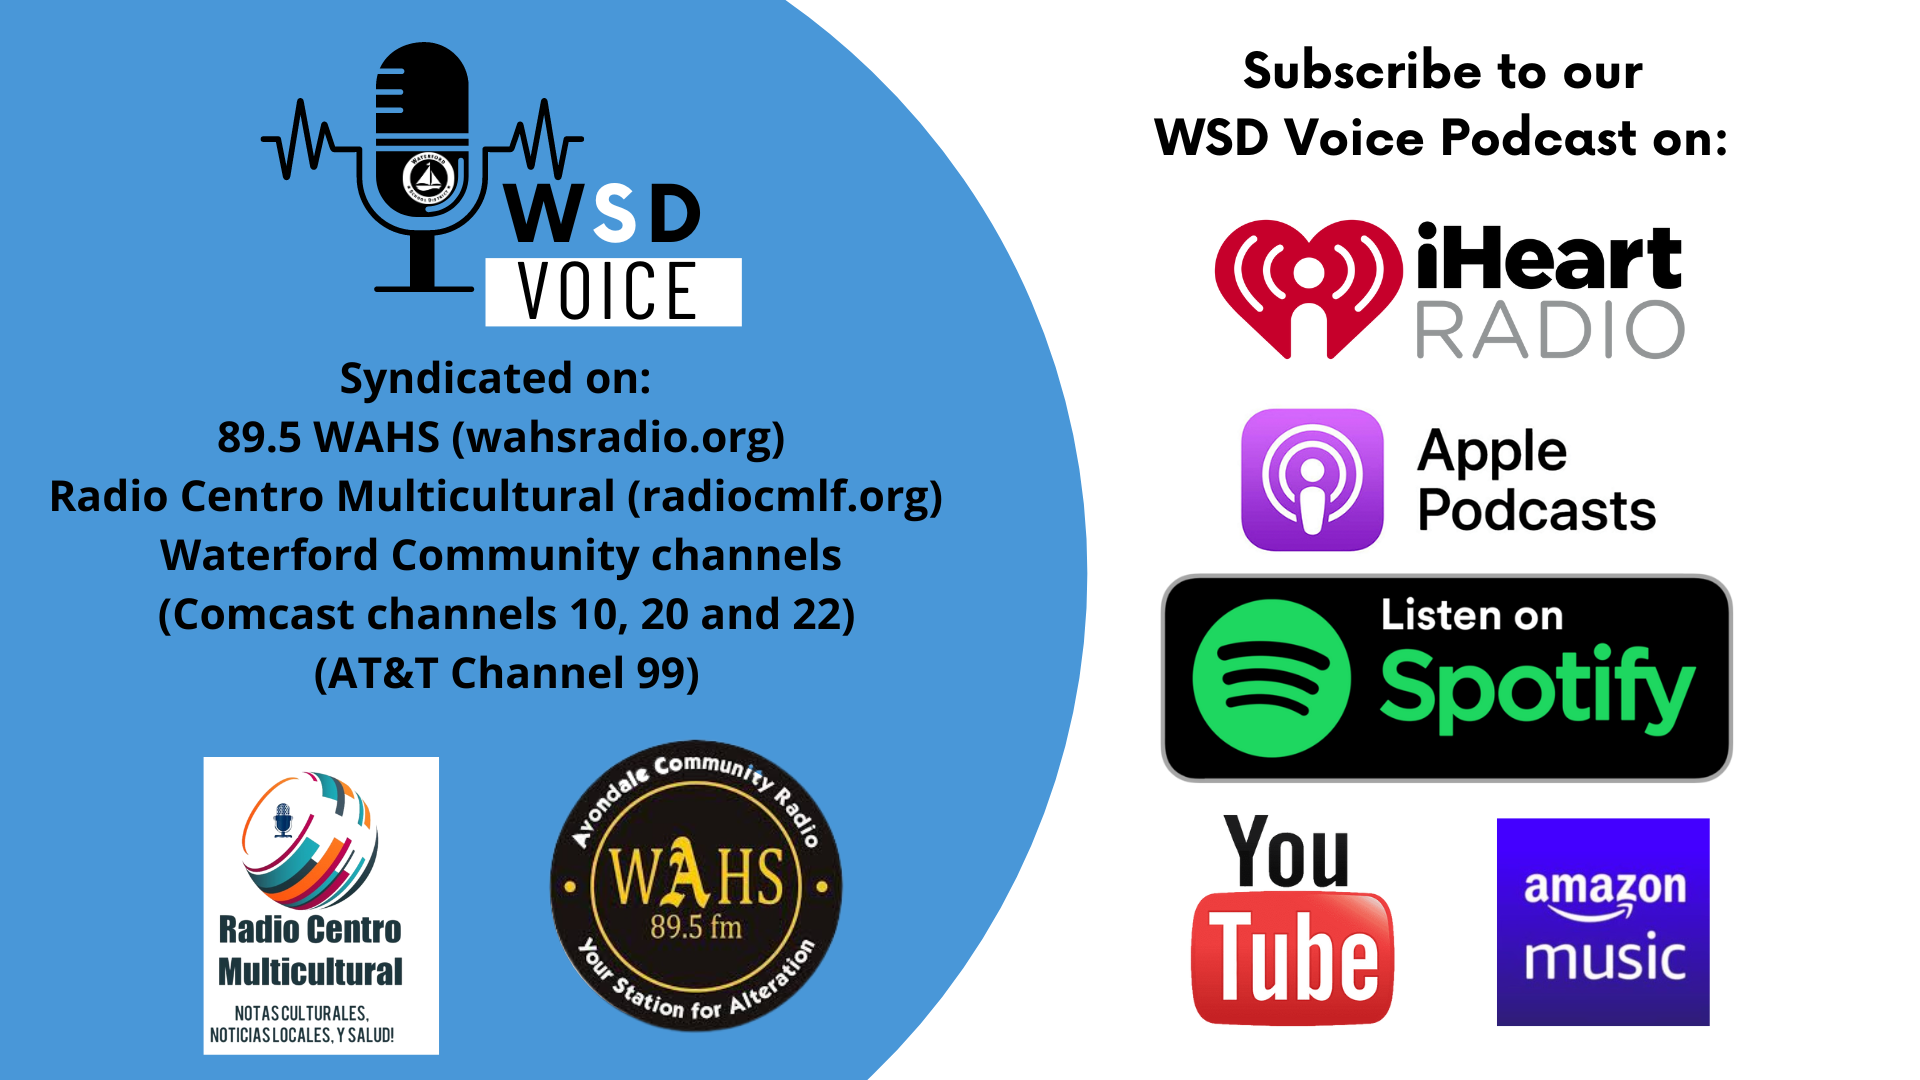 WSD Voice Podcast Advertising